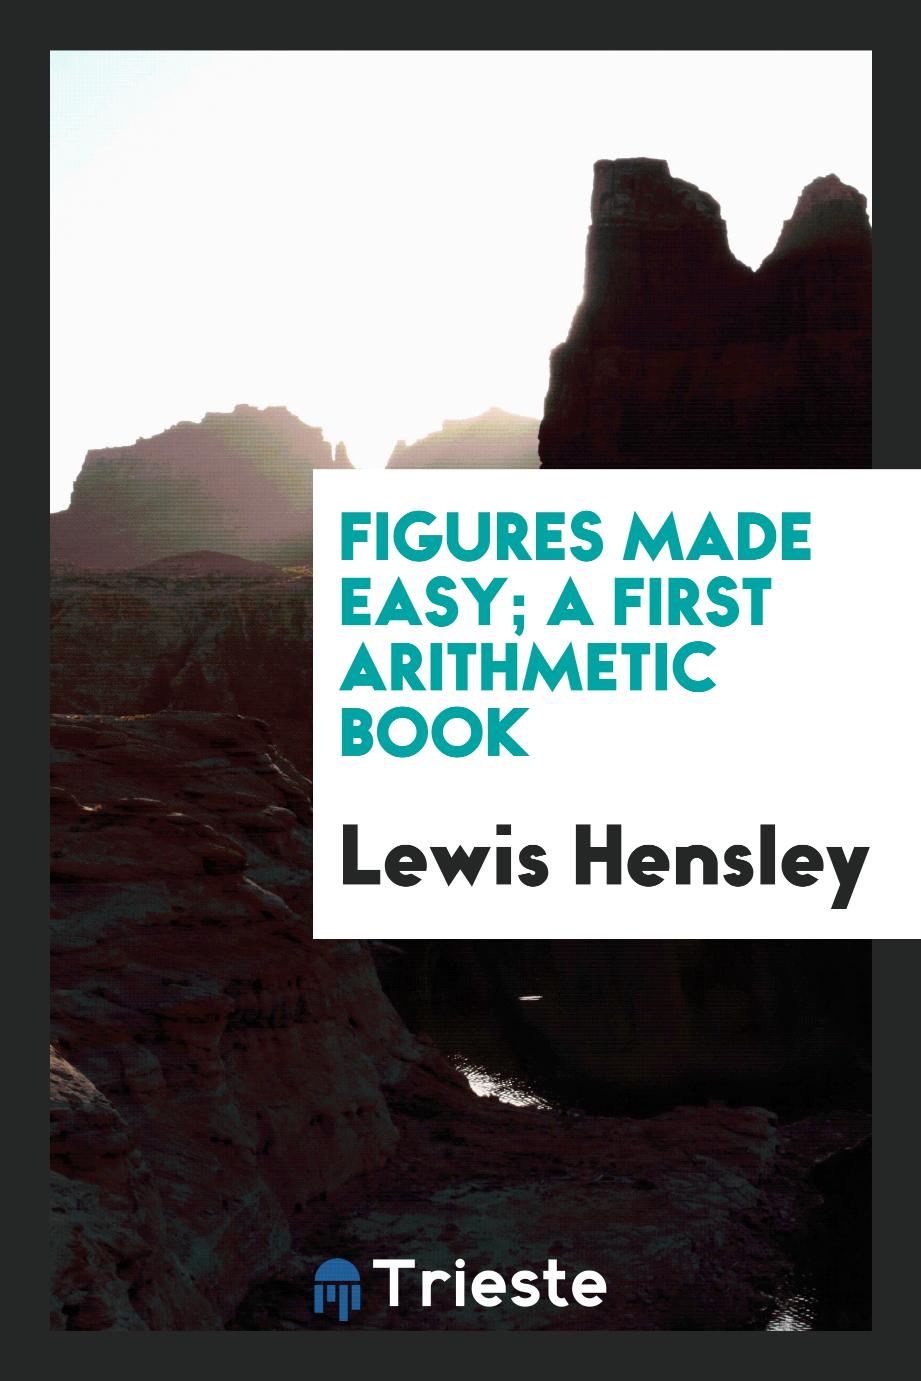 Figures made easy; a first arithmetic book